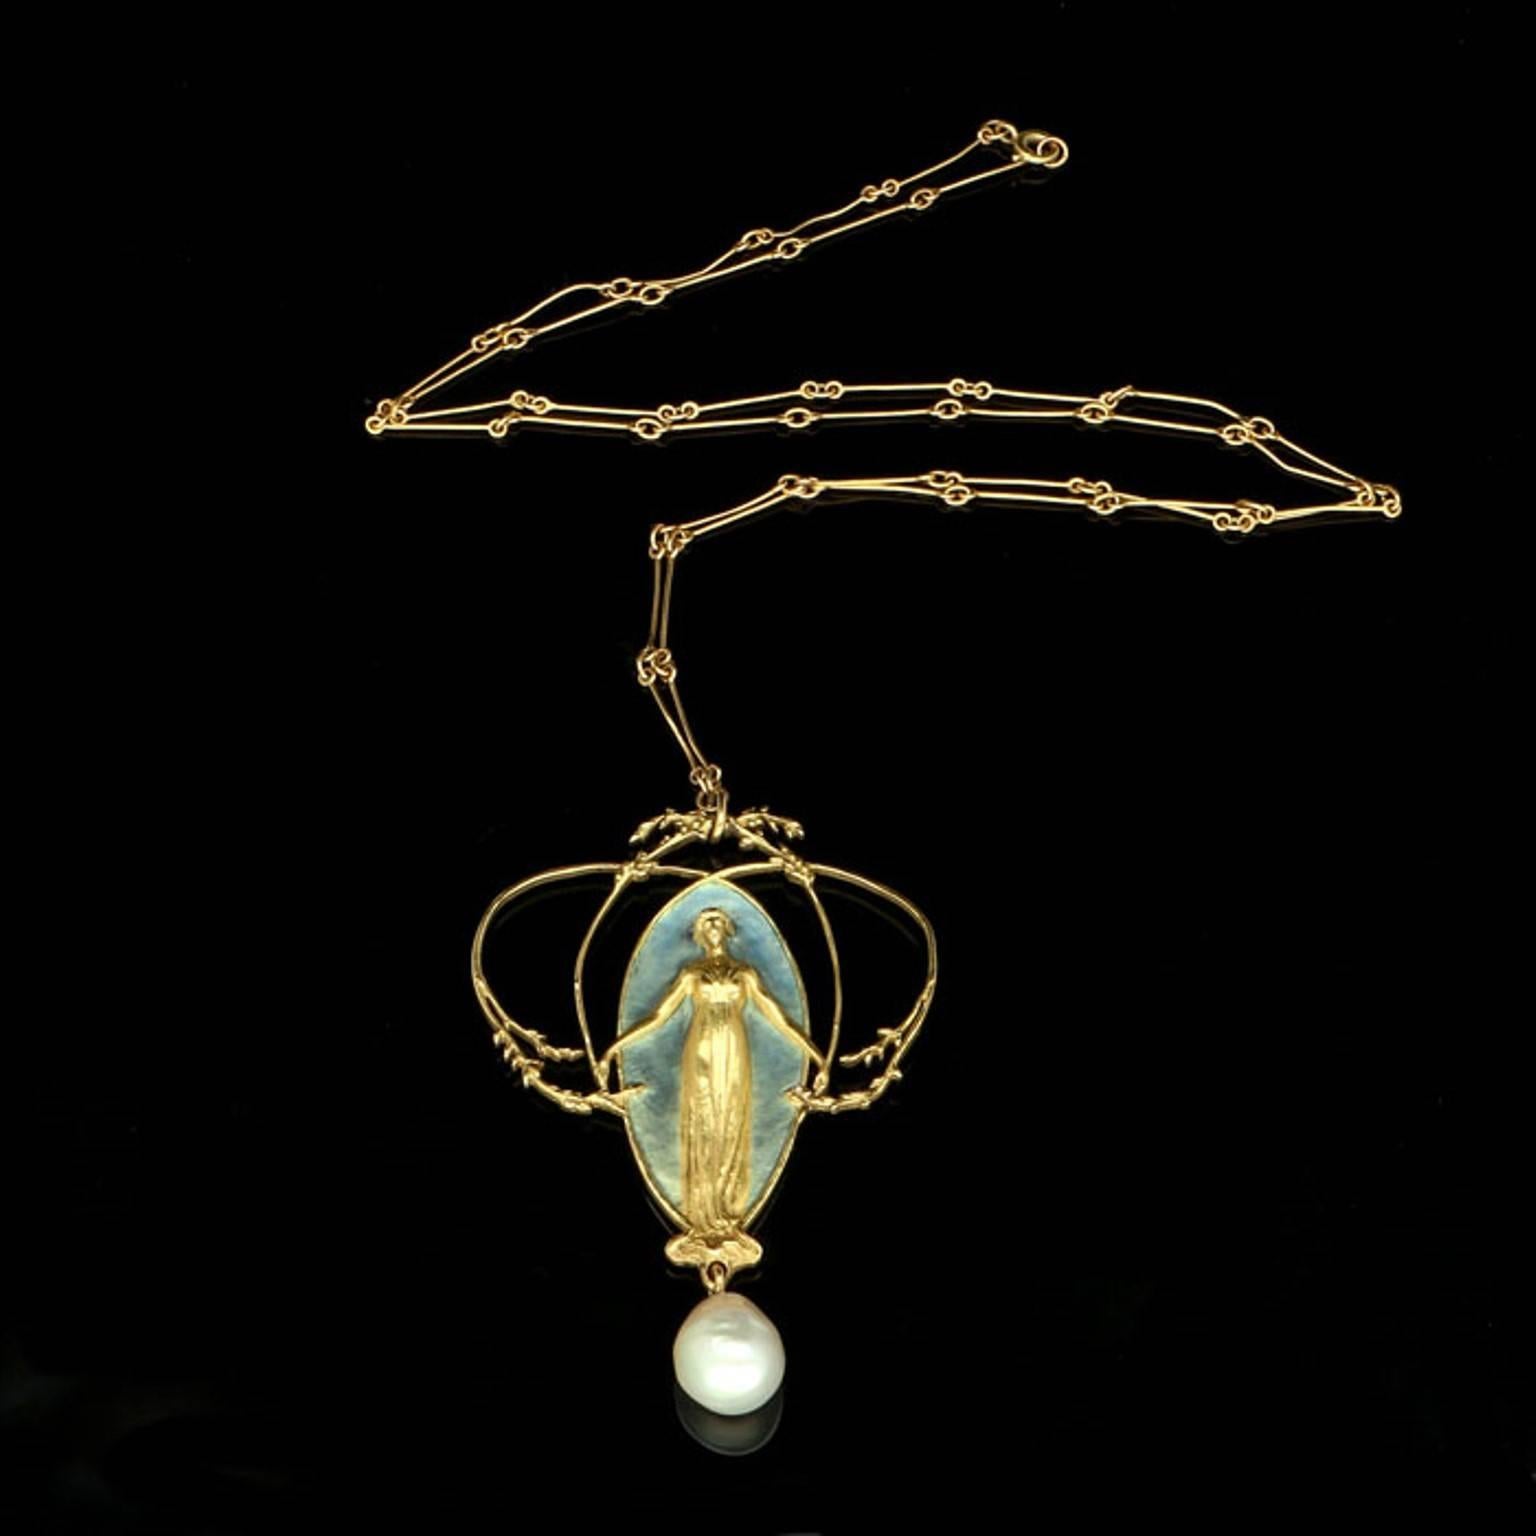 The pendant designed as a female figure in classical dress with her hair worn up and her arms outstretched, modelled in unadorned yellow gold against a background of blue enamel which fades gradually towards her feet, framed by arching foliate